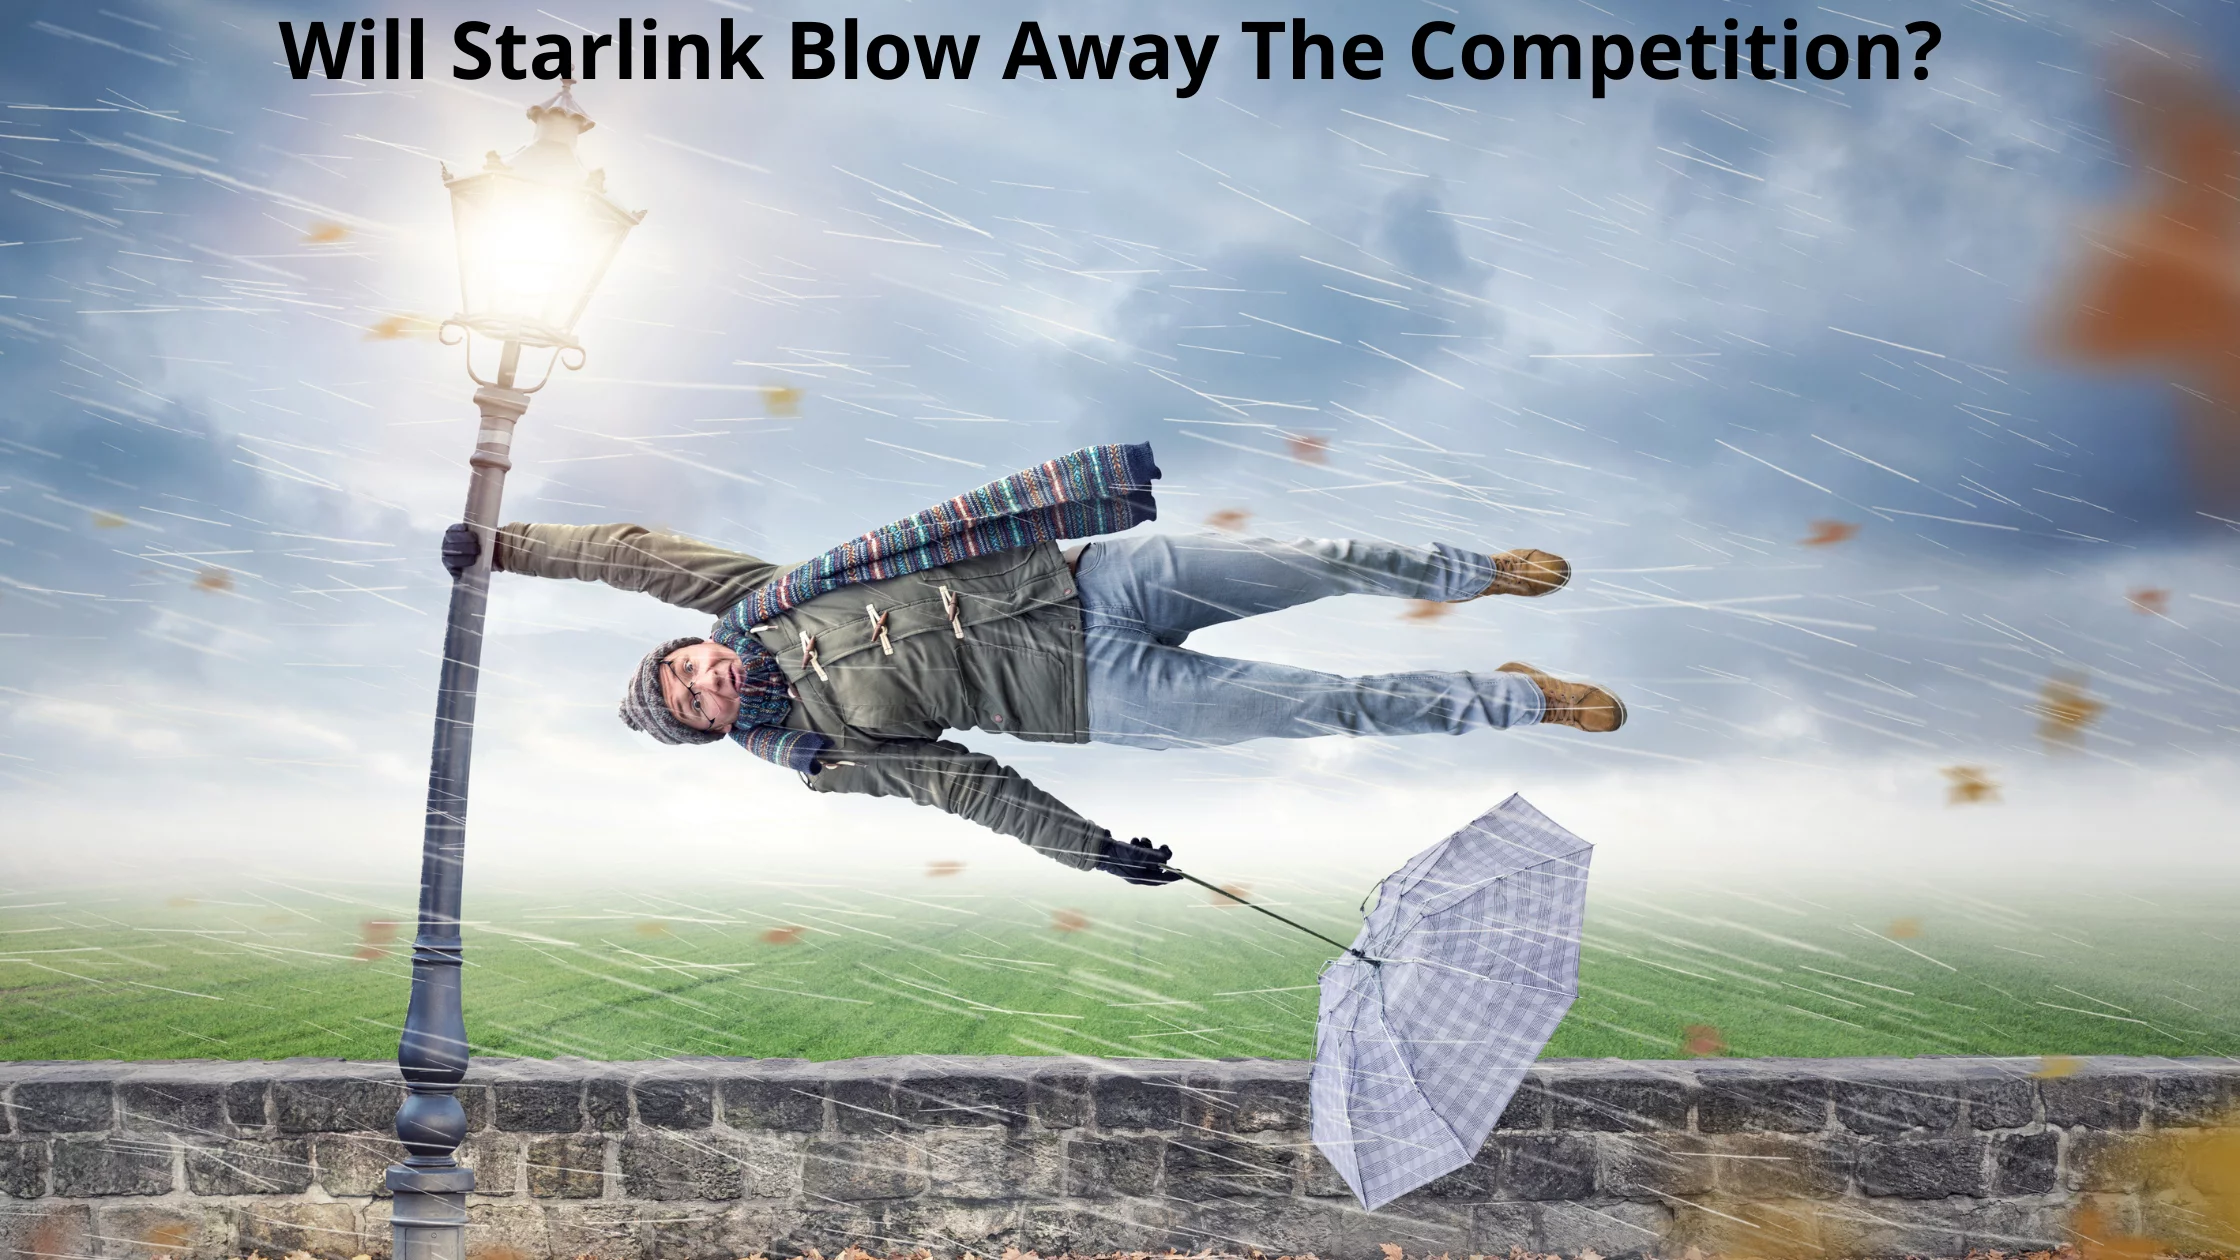 starlink blowing away the competition